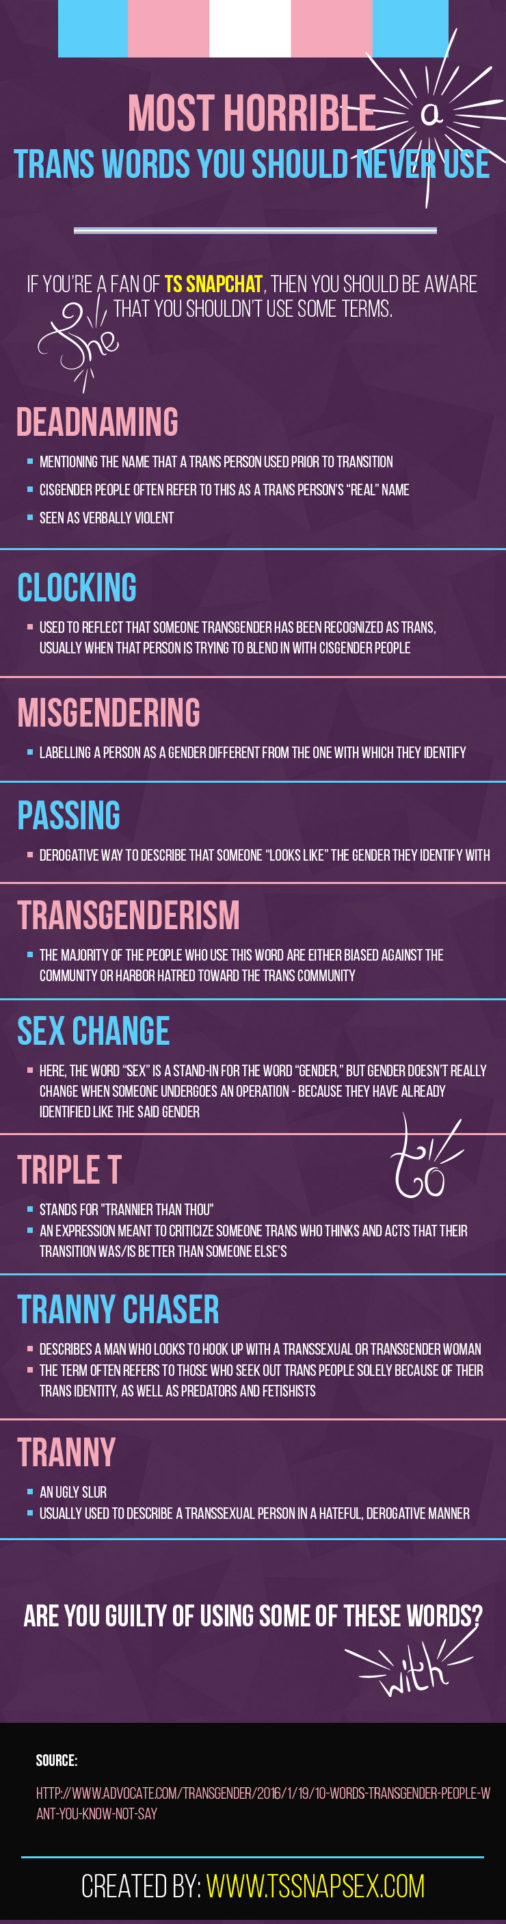 Most Horrible Trans Words You Should Never Use